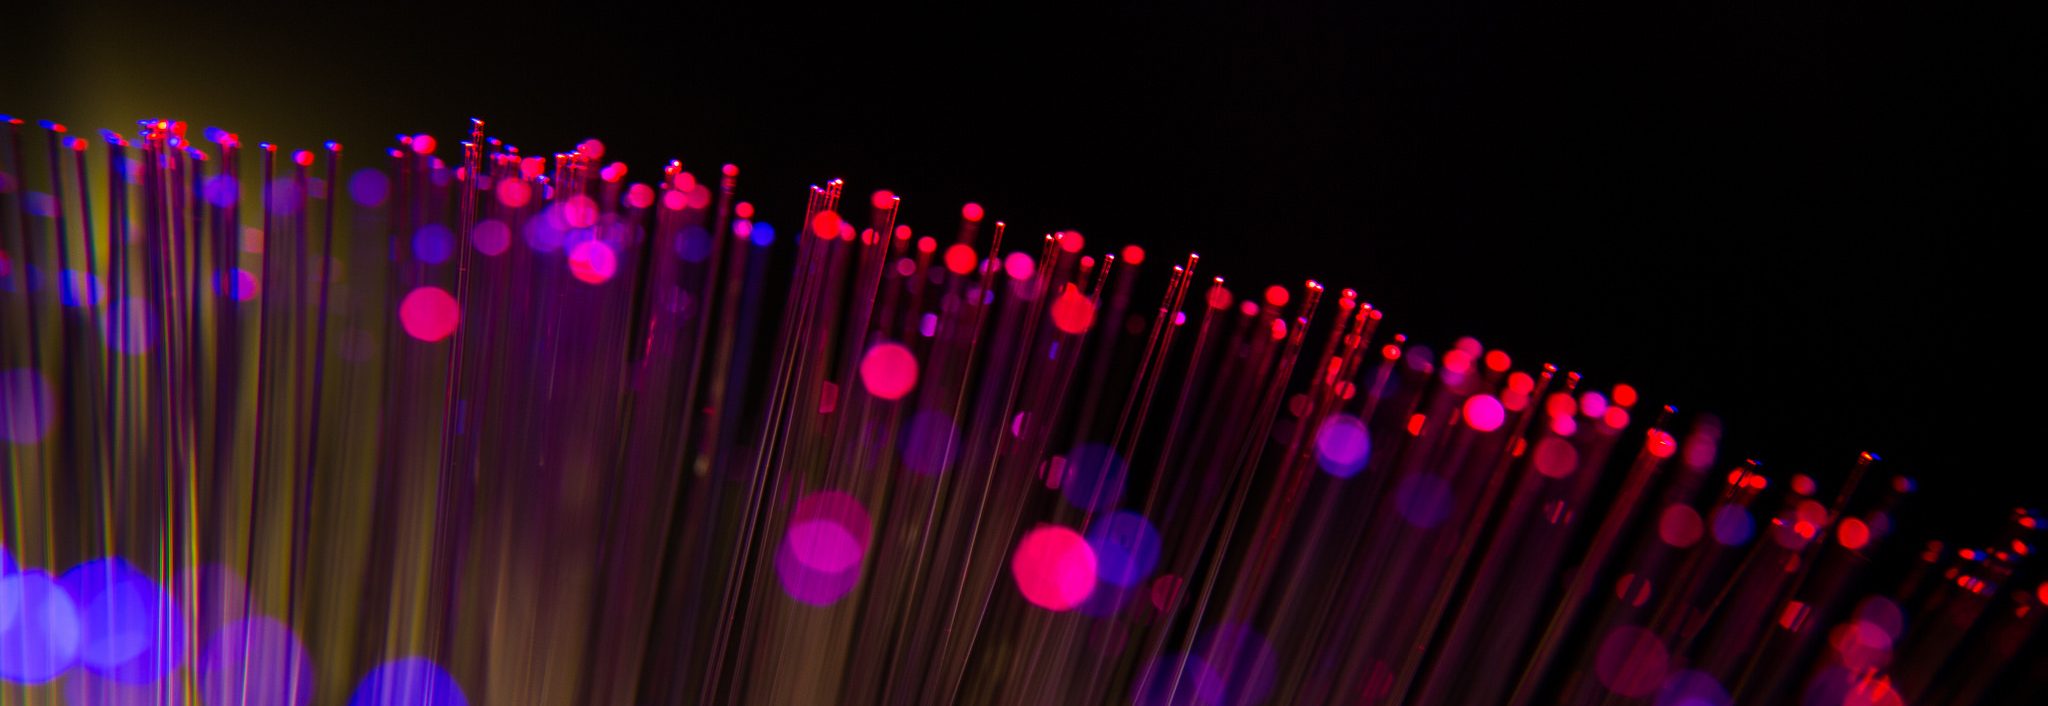 A picture of optical fibres with lights running through them